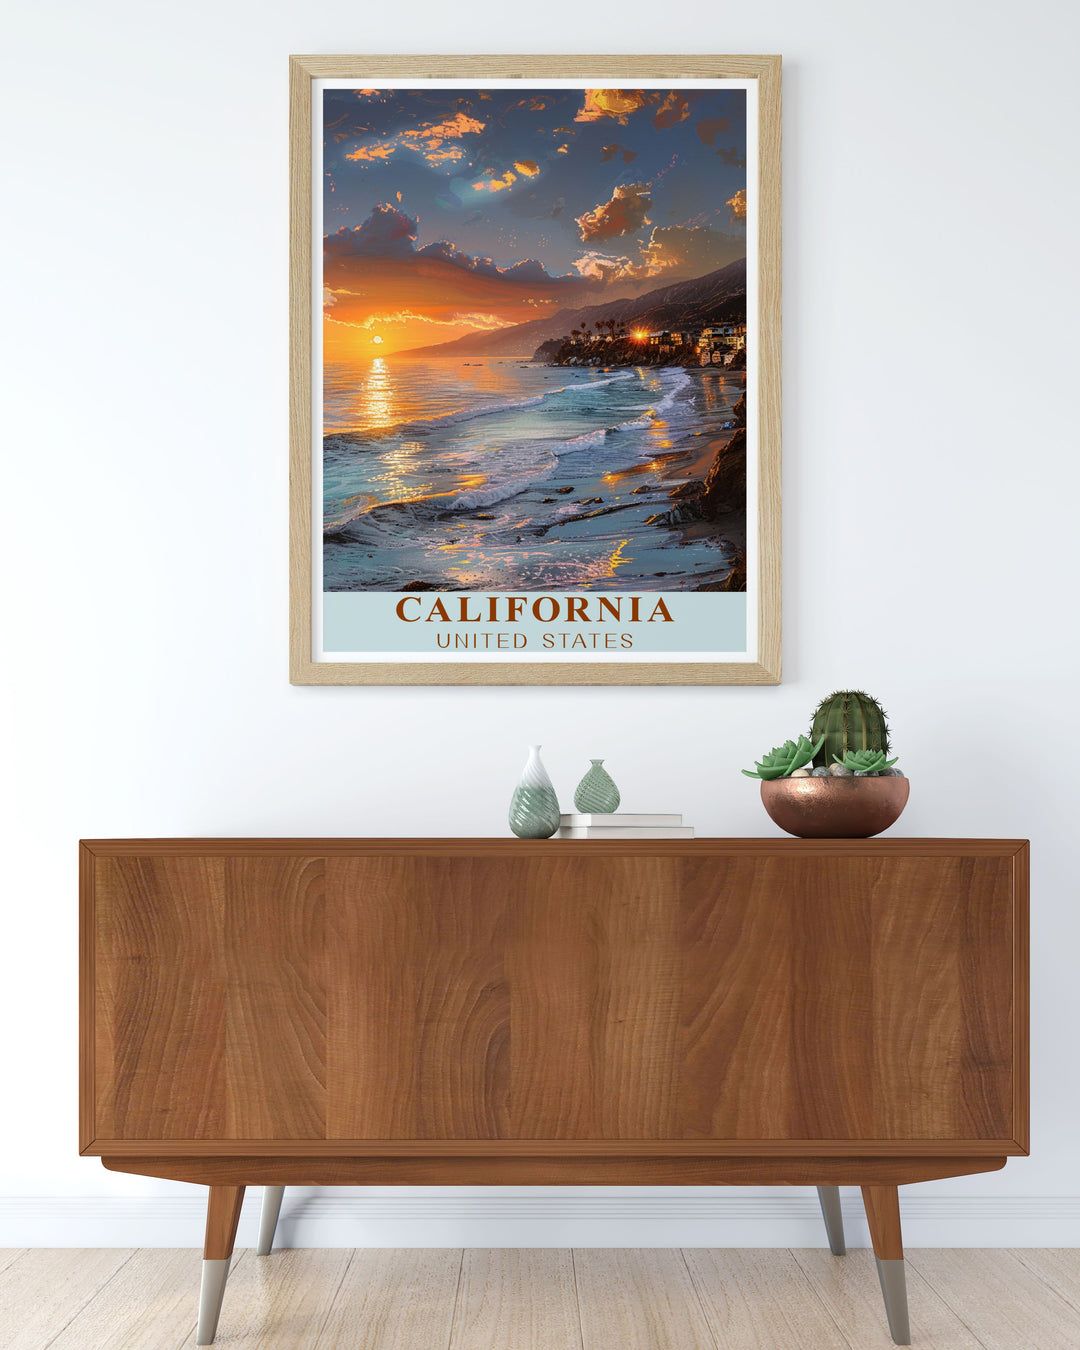 Vintage Malibu prints highlighting the picturesque coastline and tranquil ambiance of Californias famous beach town detailed and colorful artwork ideal for home or office decor a thoughtful gift for travel enthusiasts and lovers of Malibu